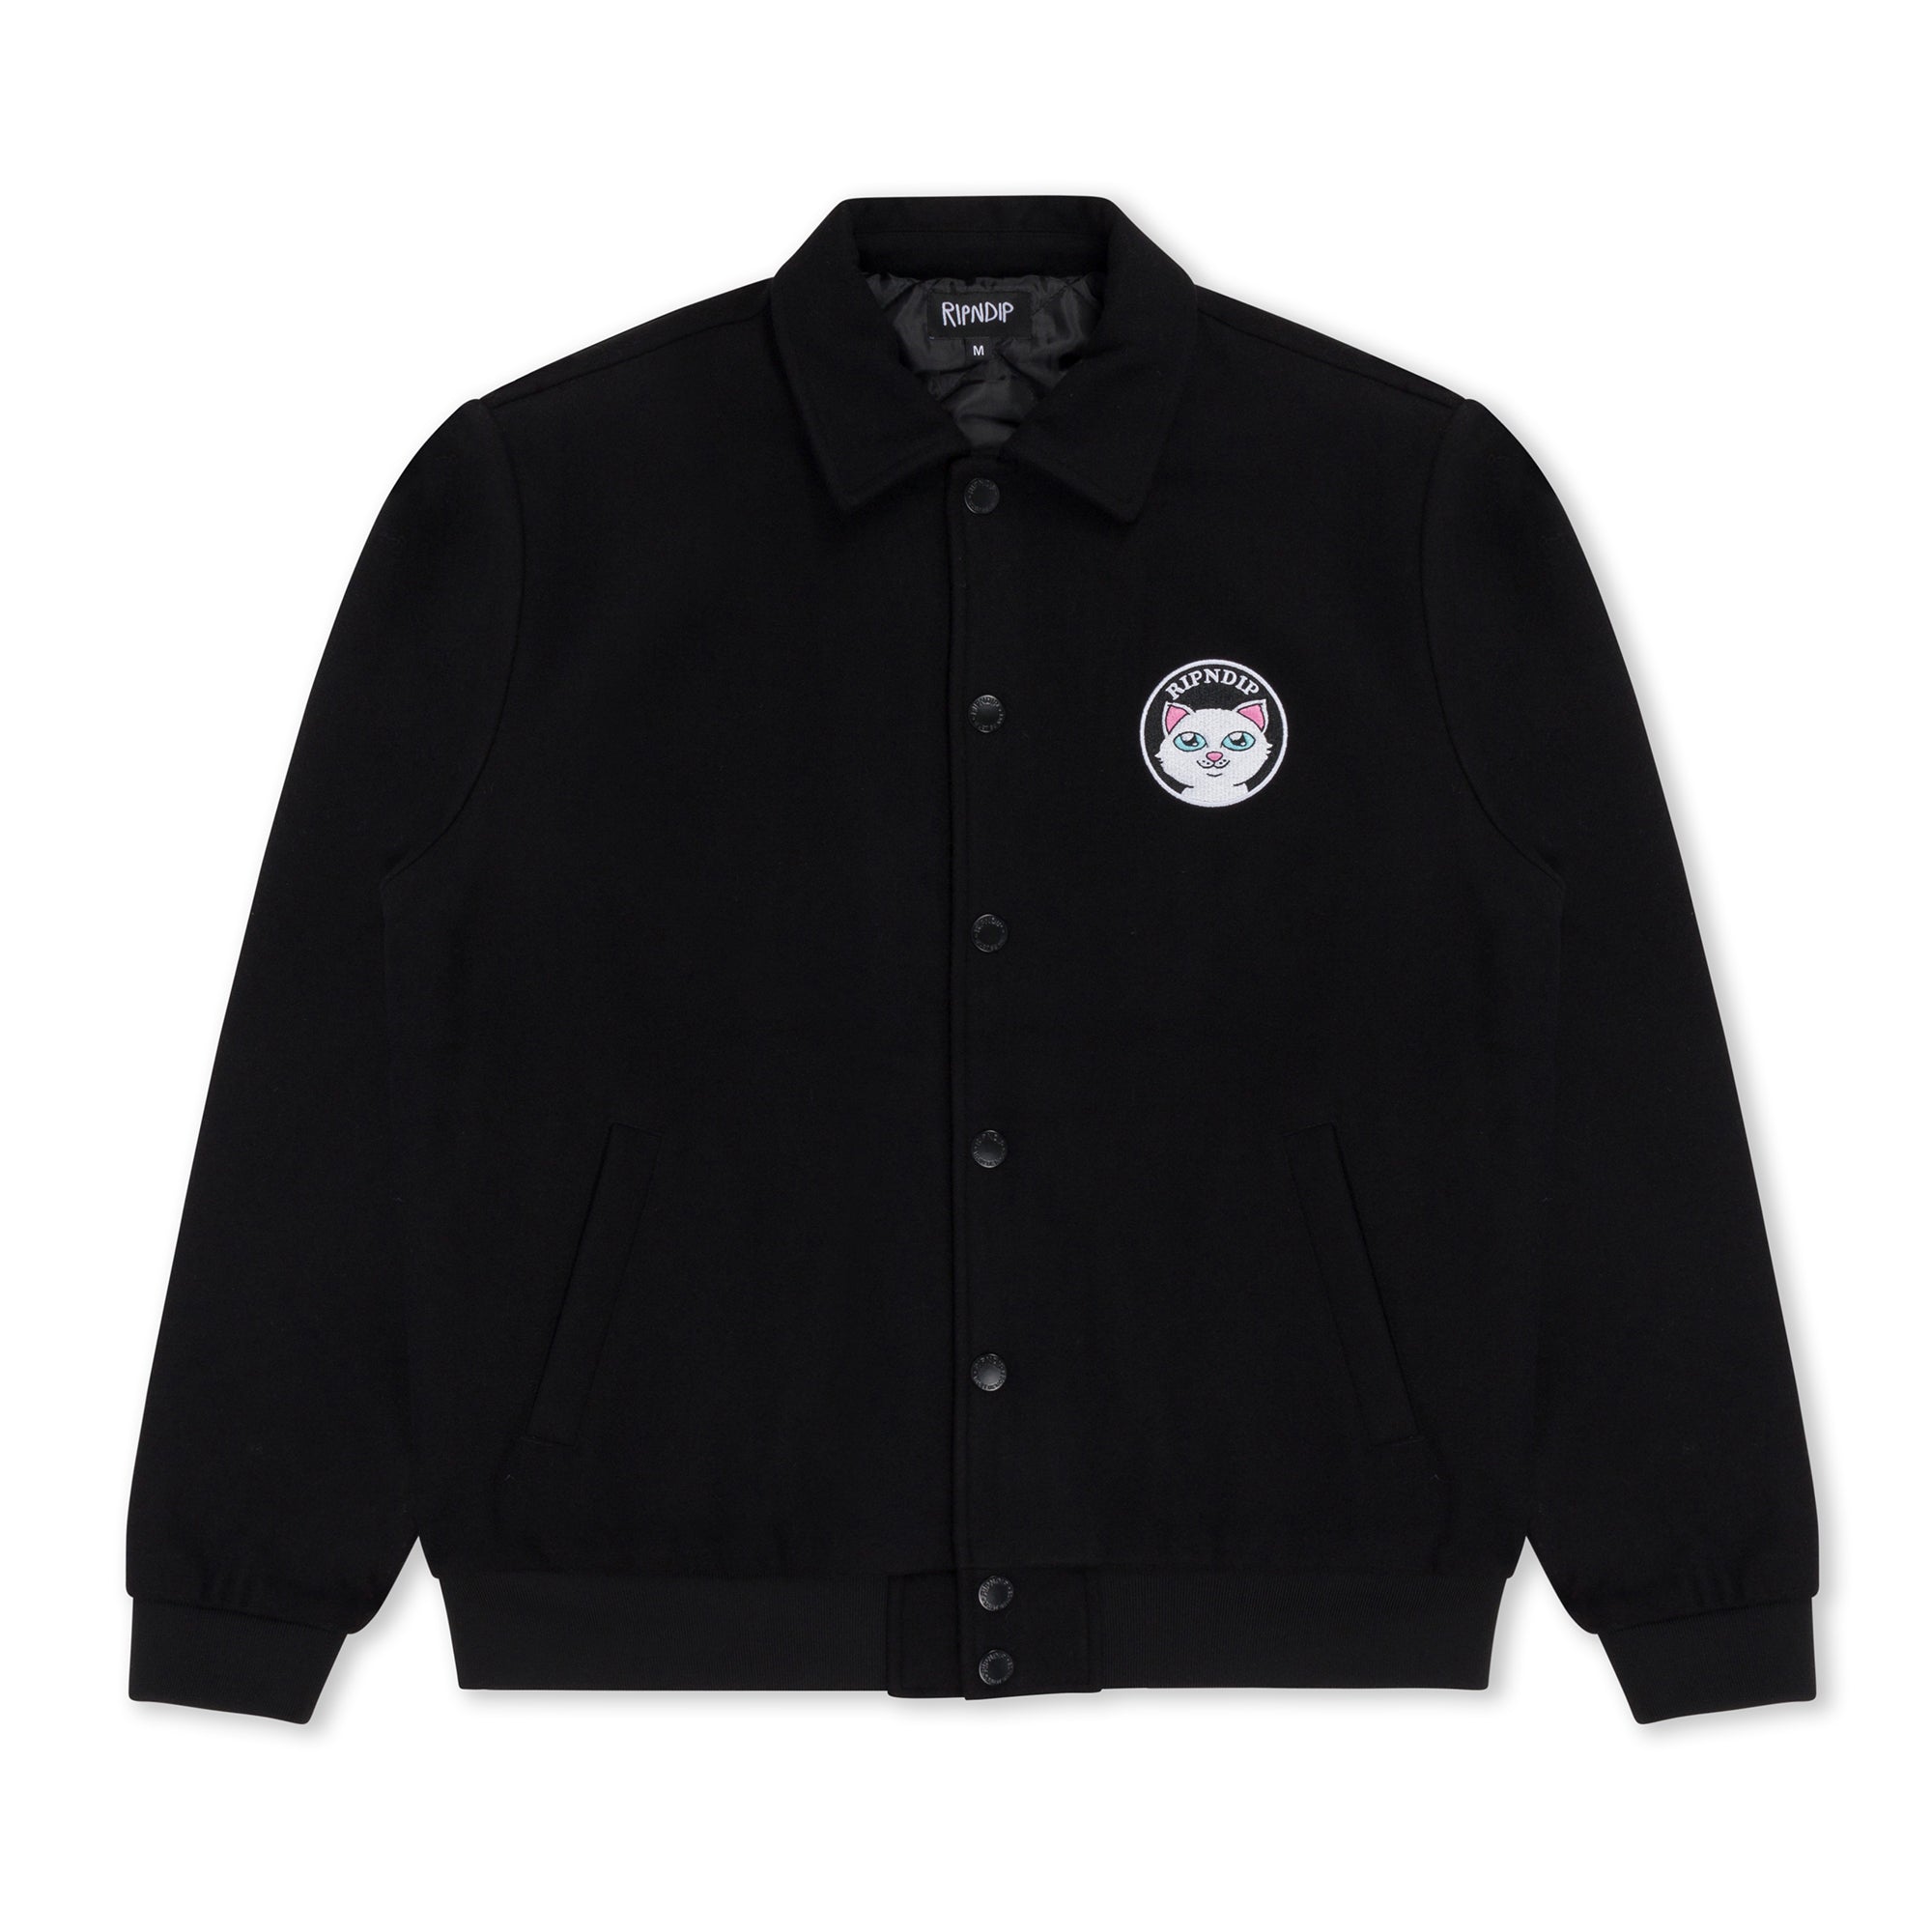 Stop Being A Pussy Varsity Jacket (Black)